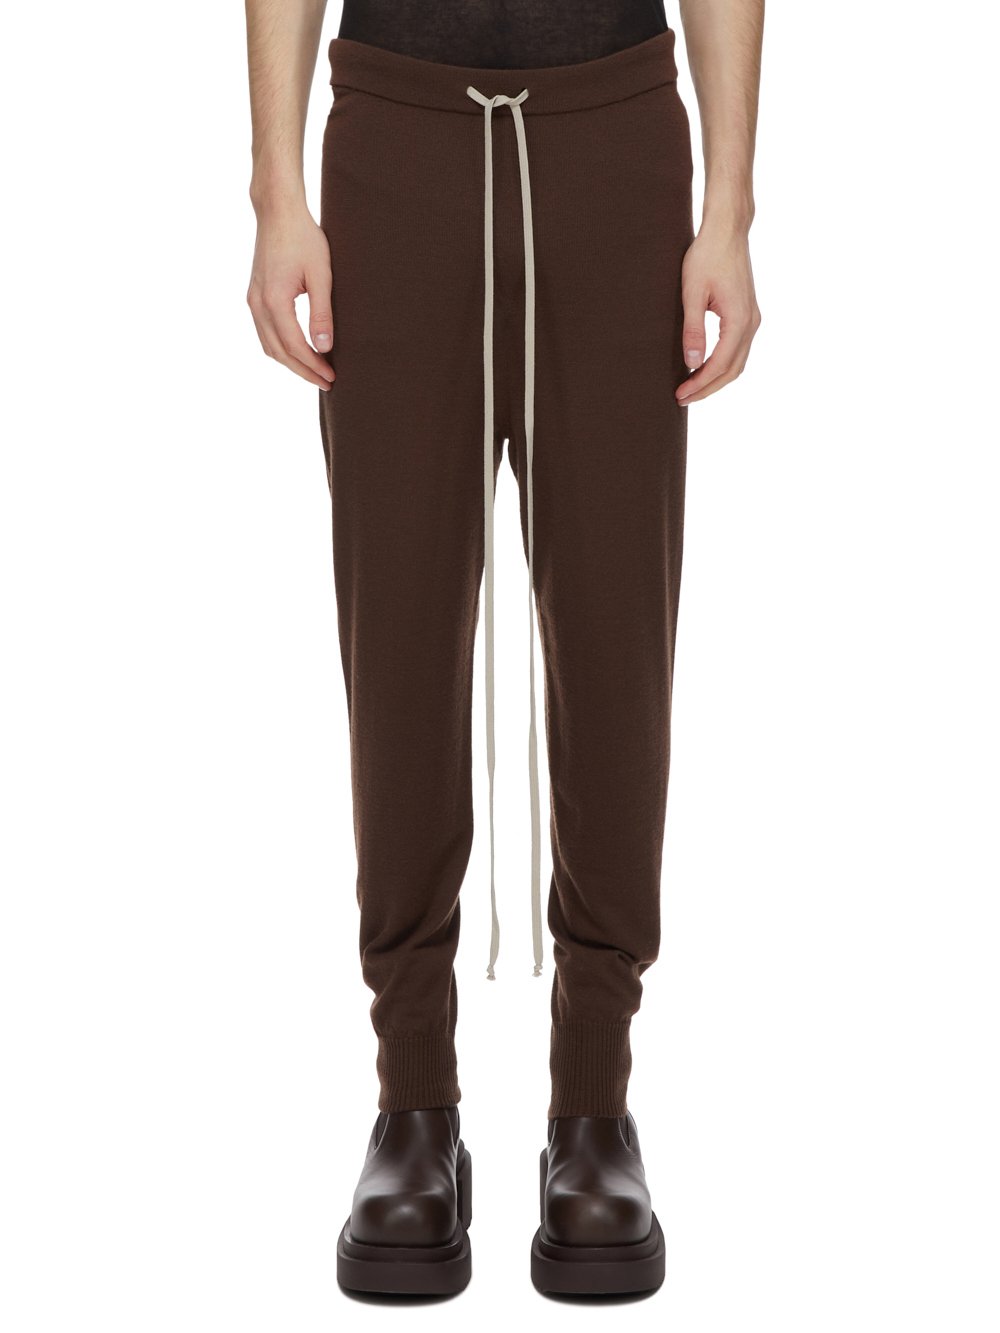 RICK OWENS FW23 LUXOR TRACK PANTS IN BROWN LIGHTWEIGHT RASATO KNIT